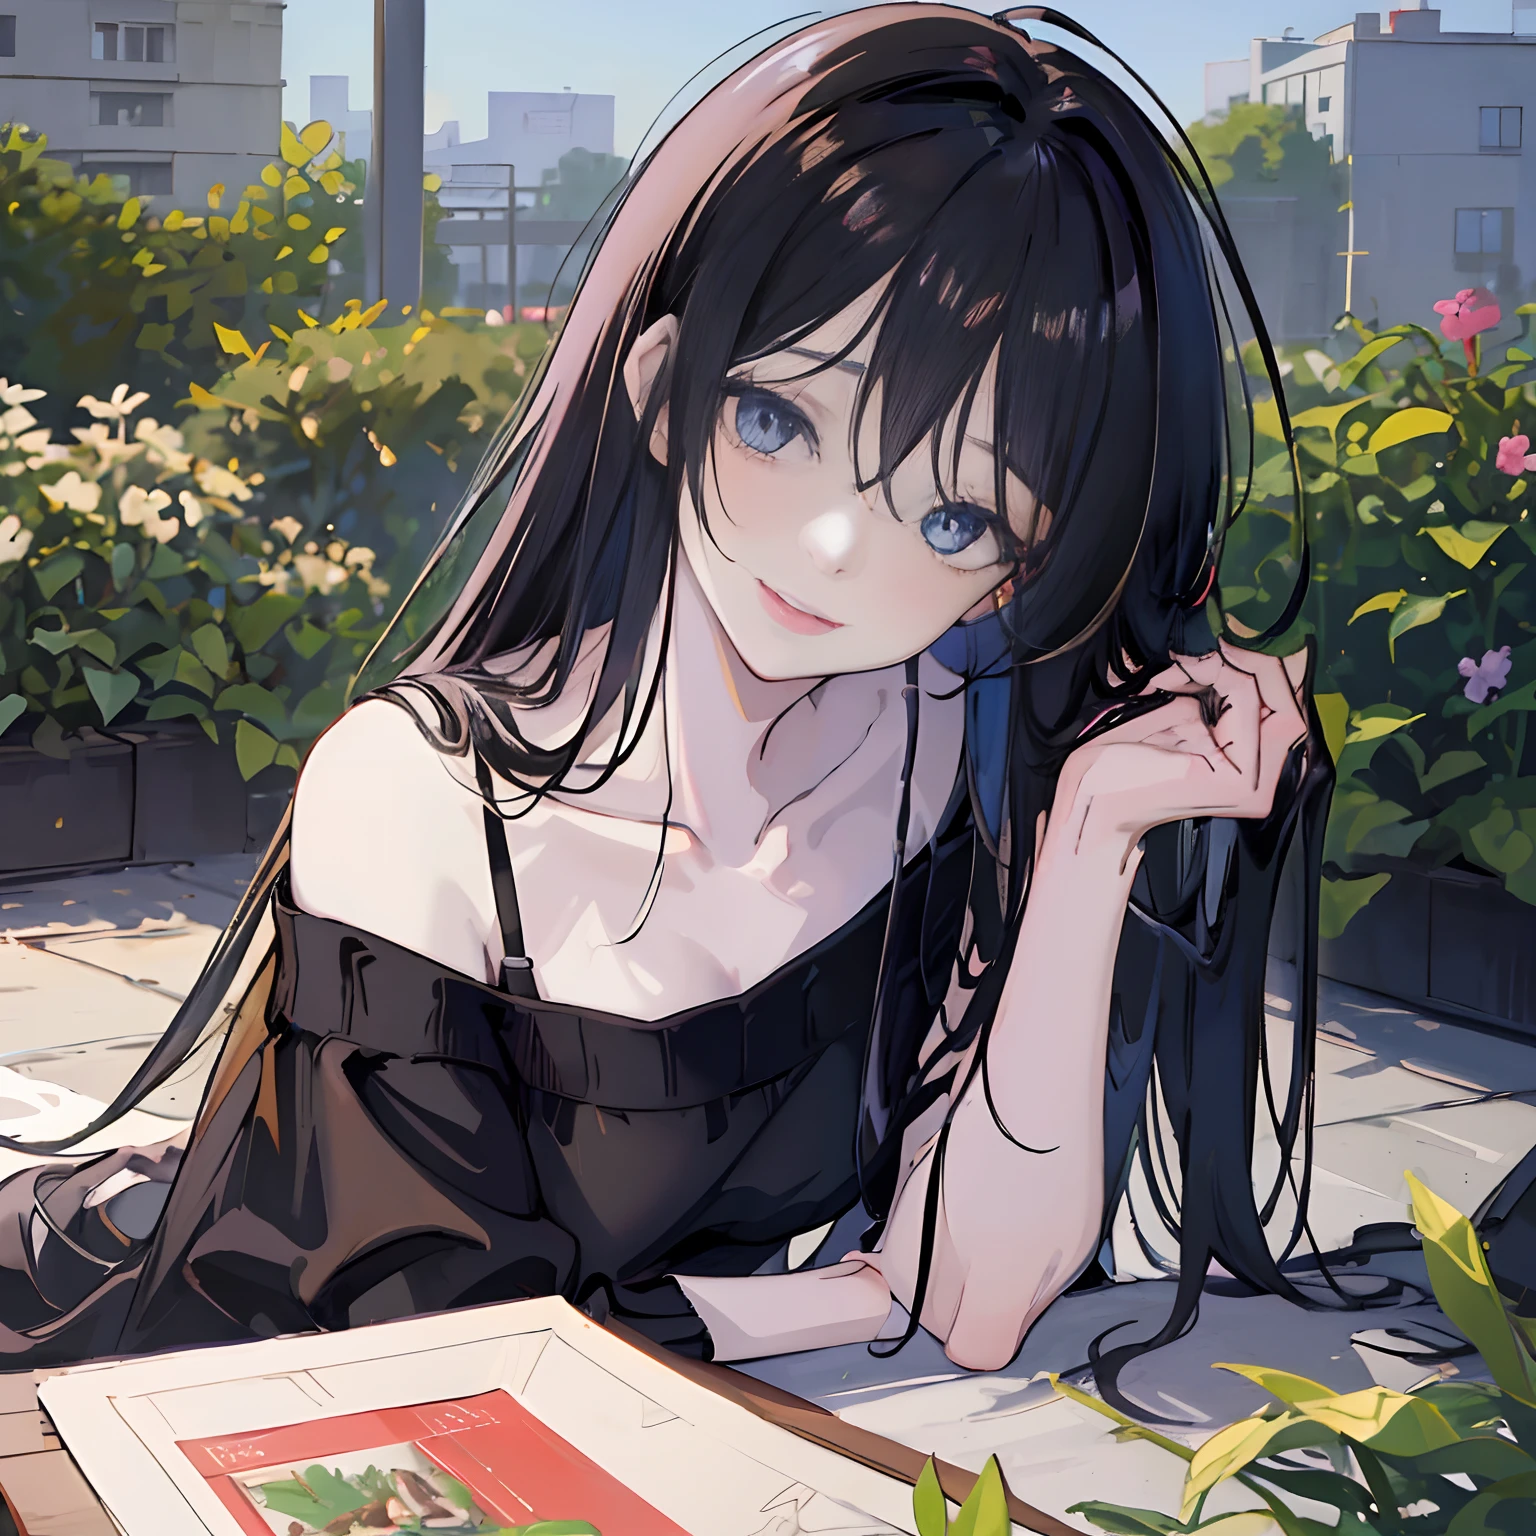 ((masterpiece, best quality)), (()), Anime version, ((Anime girl)), long black hairstyle, messy front hair, laying down in garden on back, wearing slightly yellow sweater, double eyelashes, thin lips, shiny deep blue eyes, pale skin, looking towards viewer, (collarbone), slight smile, intrinsic details, highres, 4k, 8k, award-winning